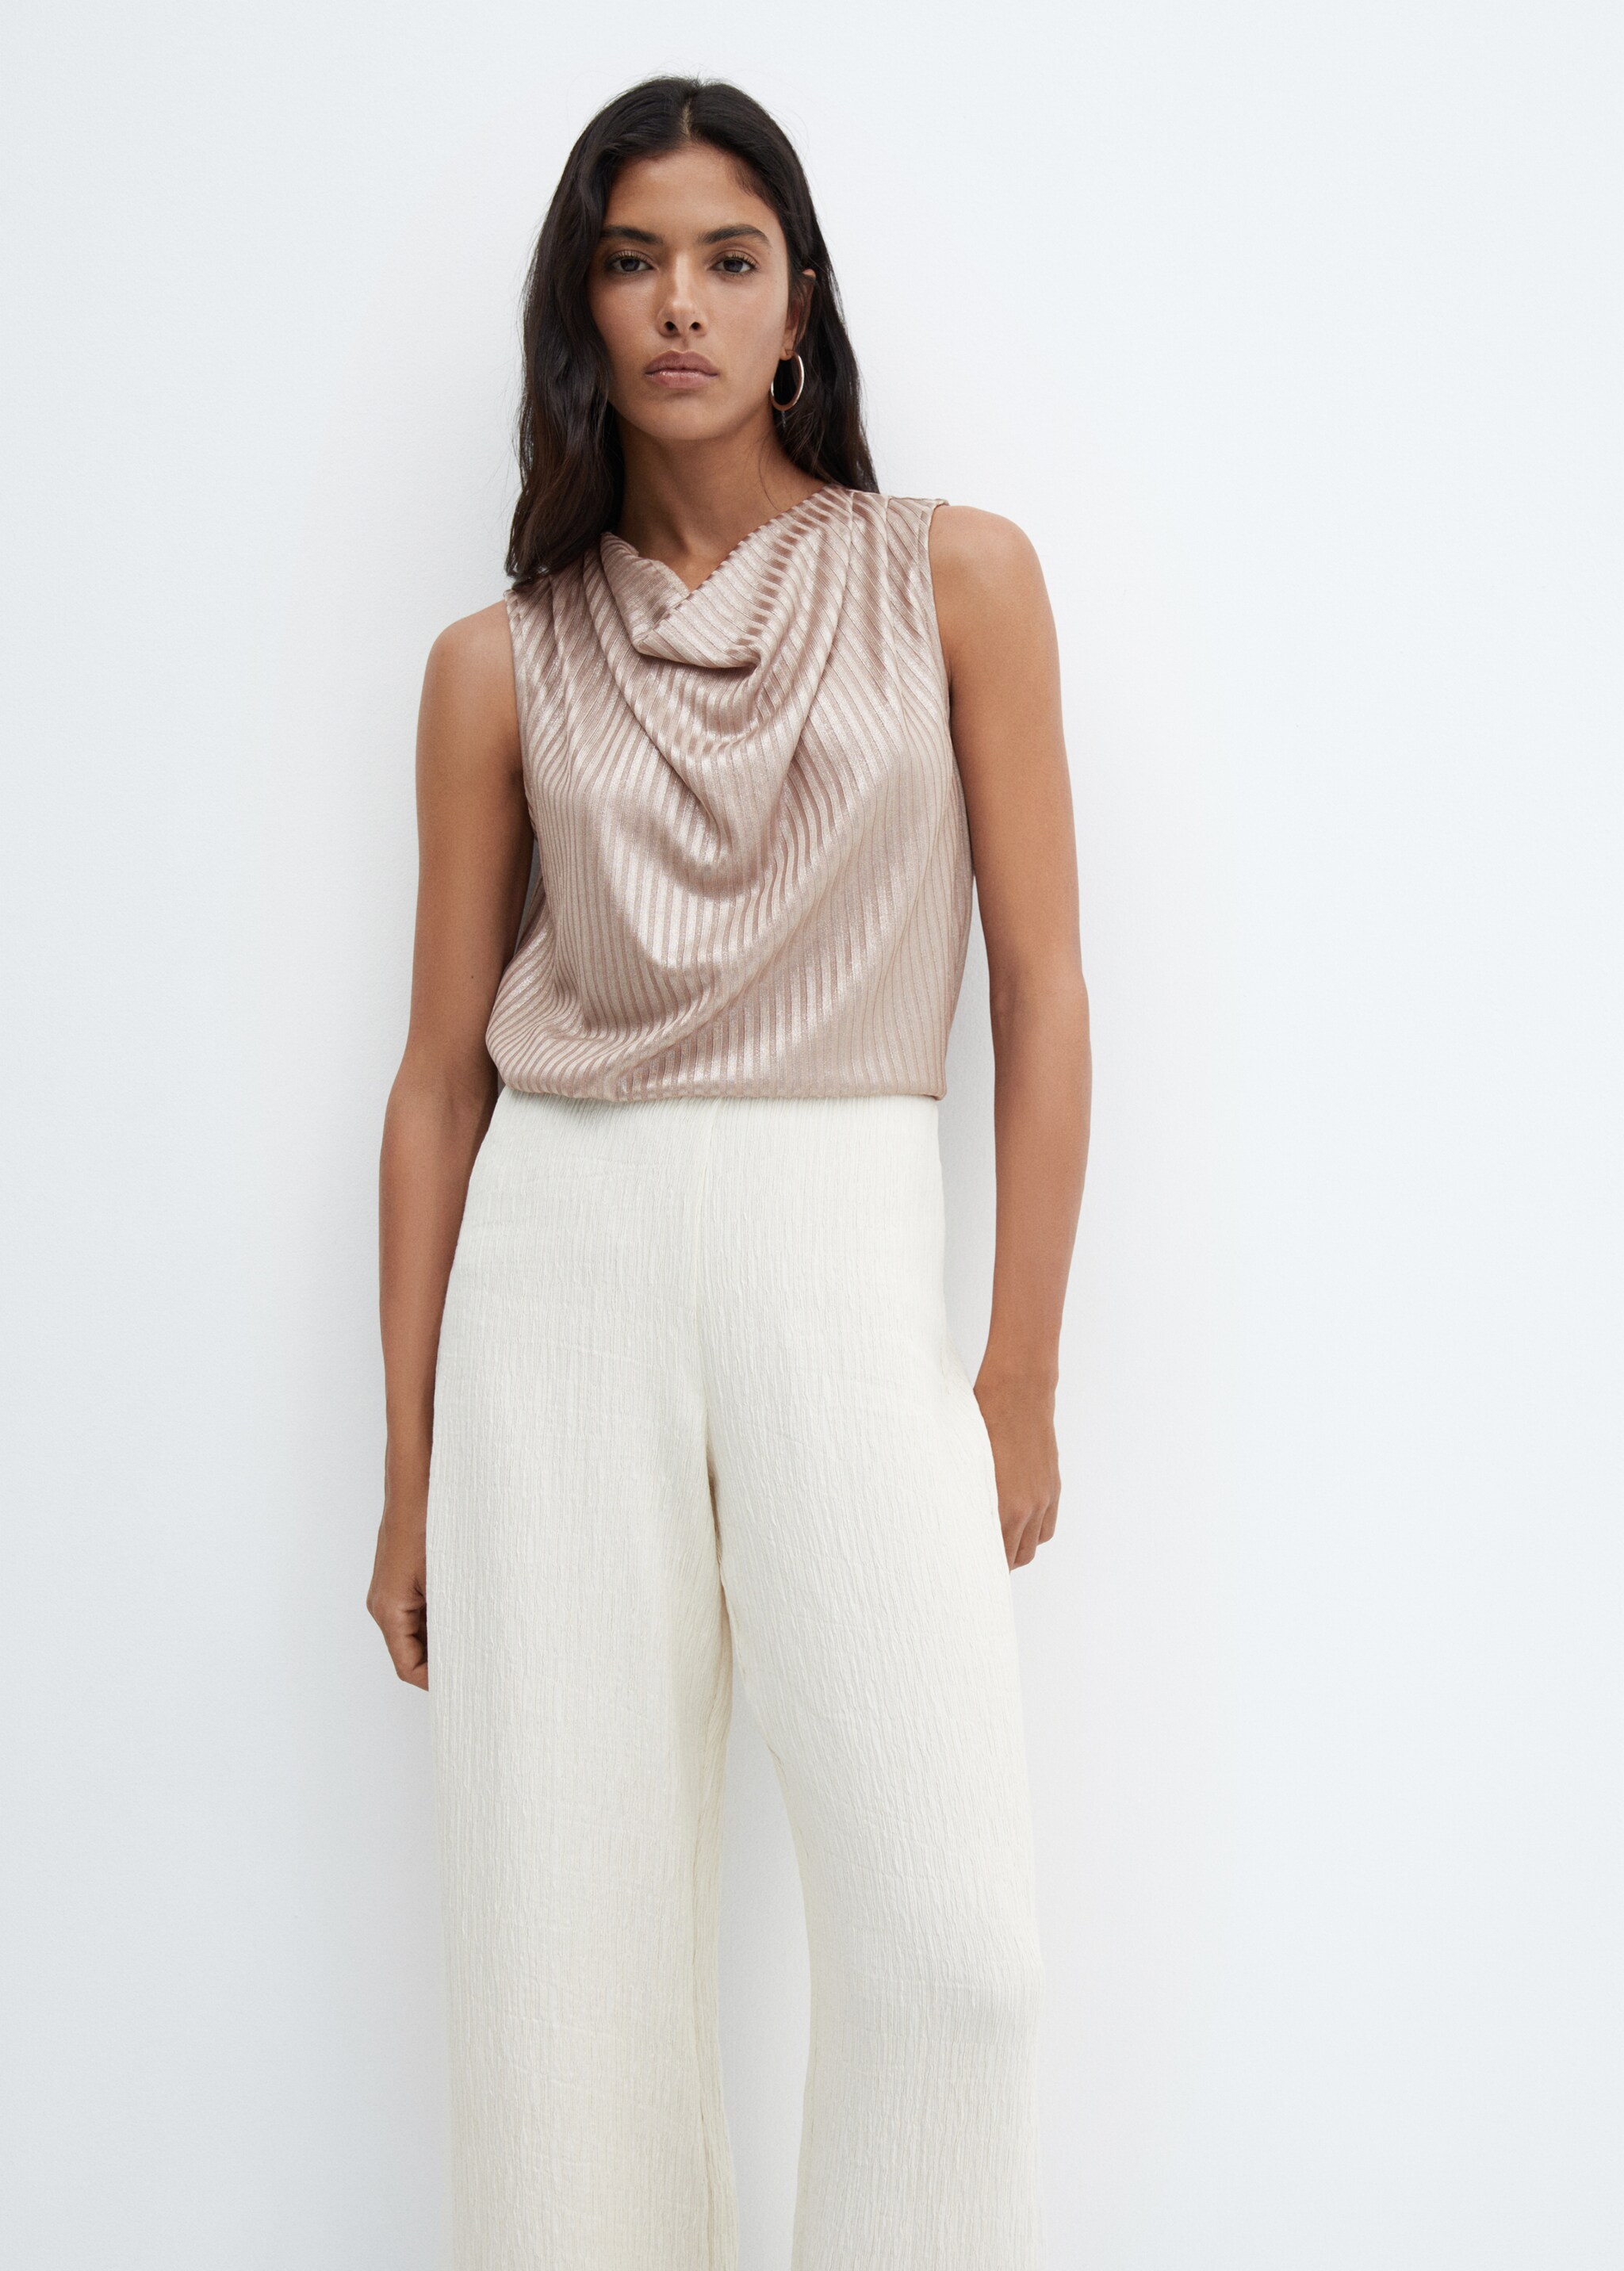 Draped neckline top - Details of the article 2